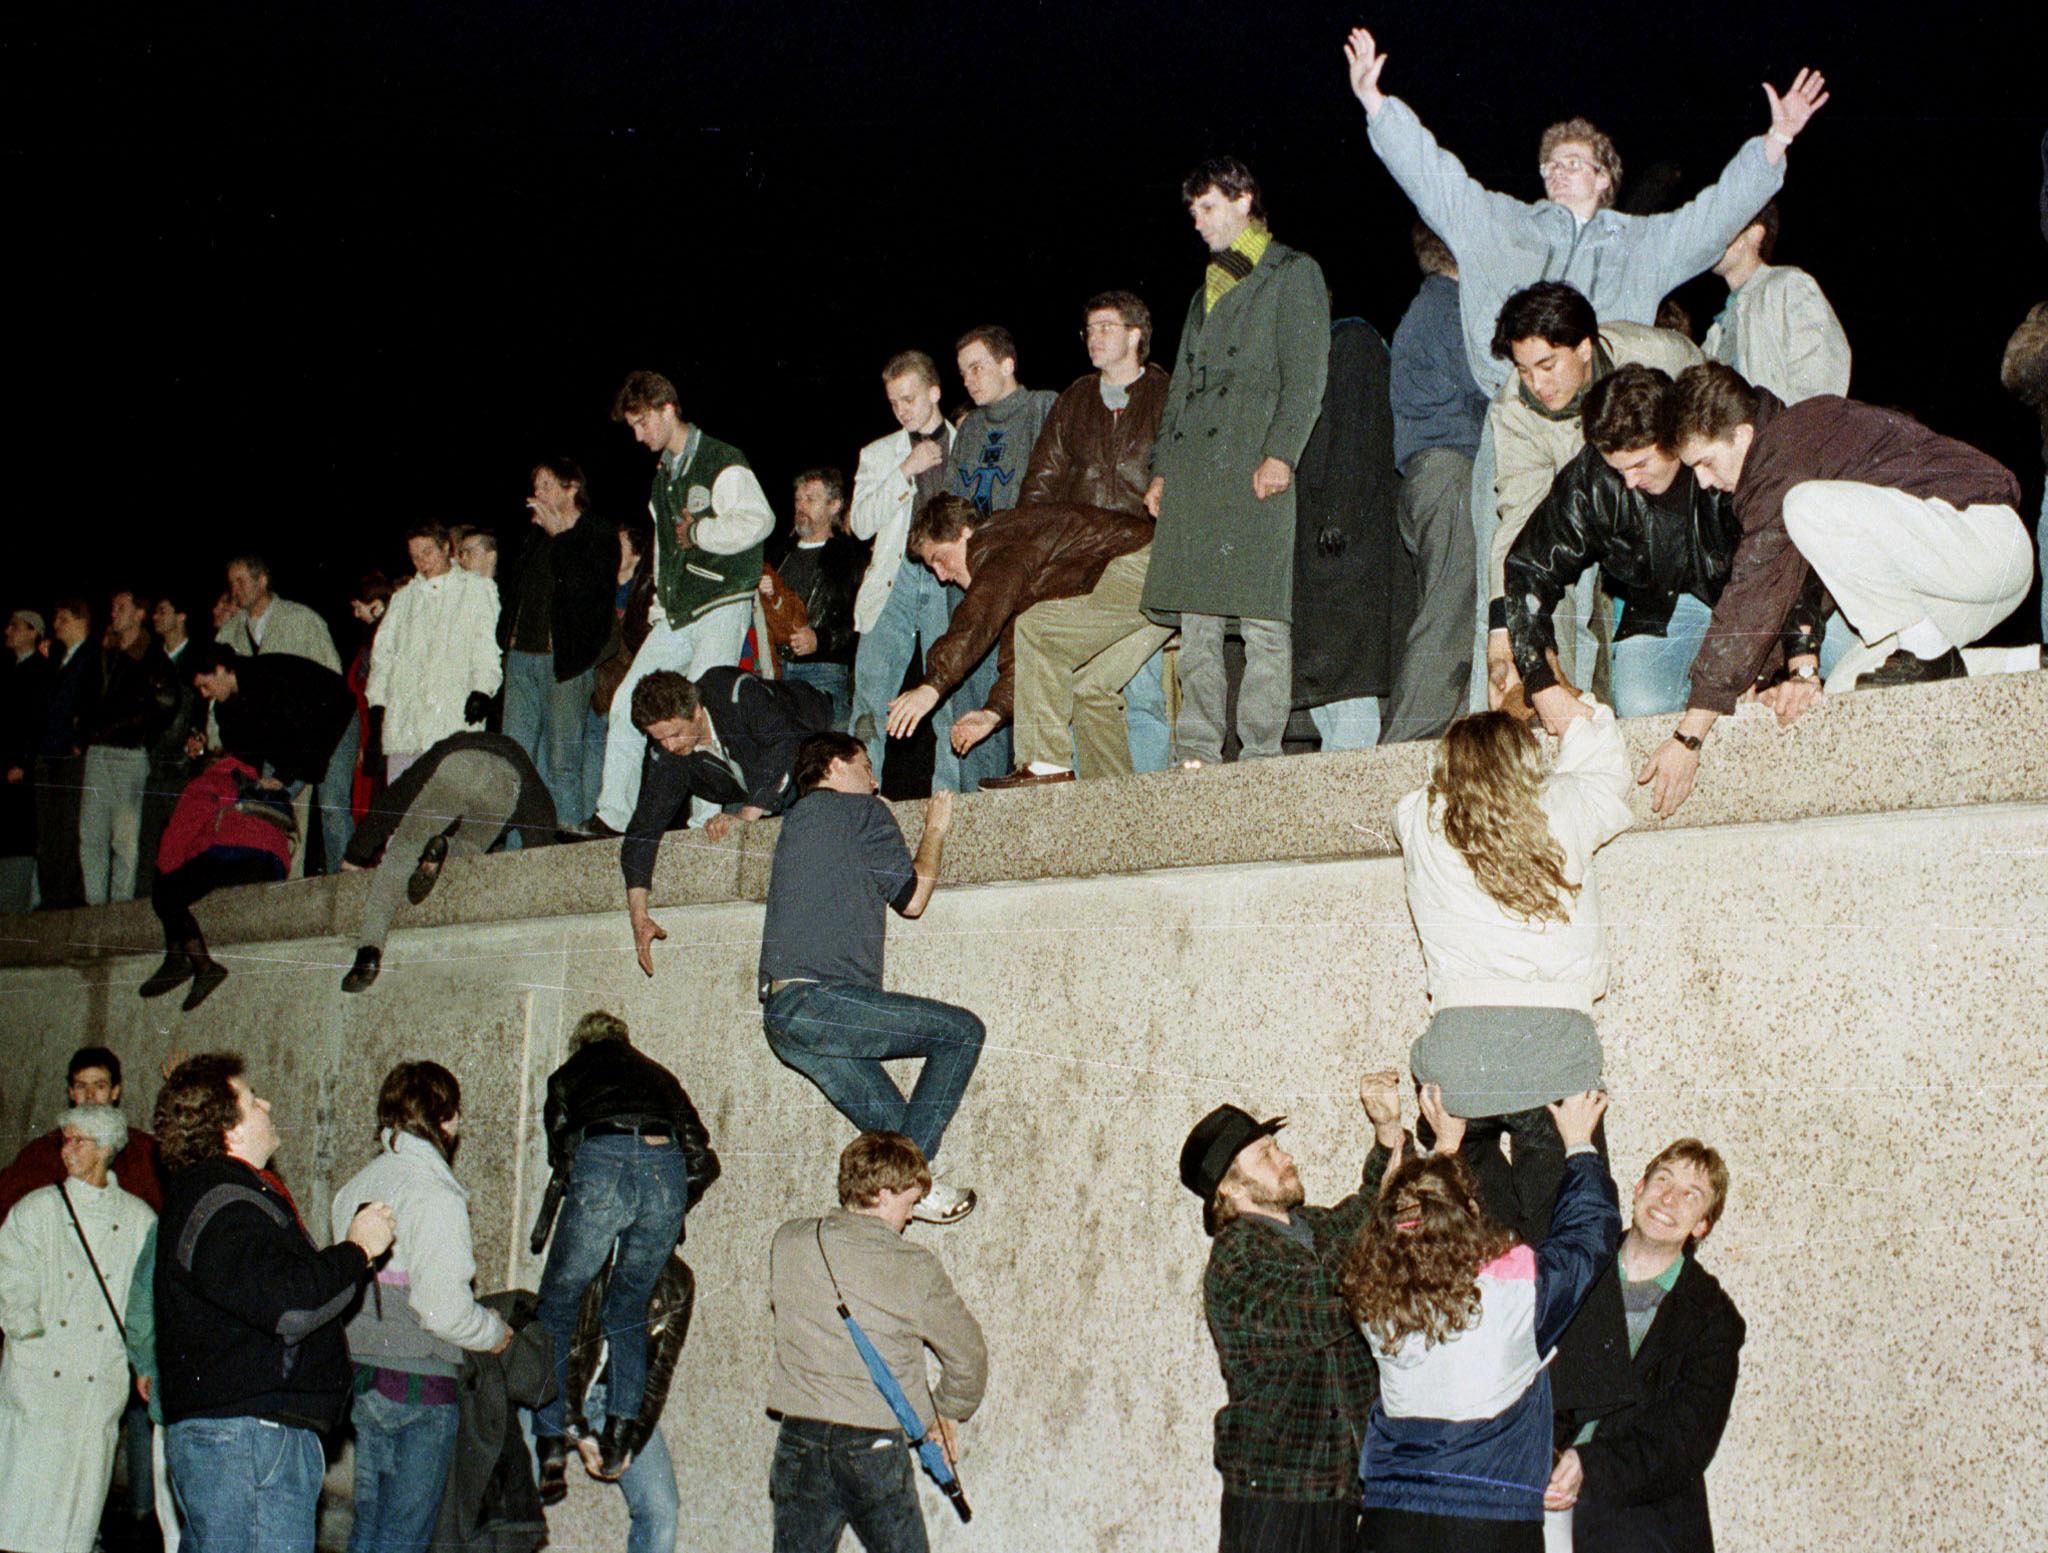 This month marks the 30th anniversary of the fall of the Berlin Wall